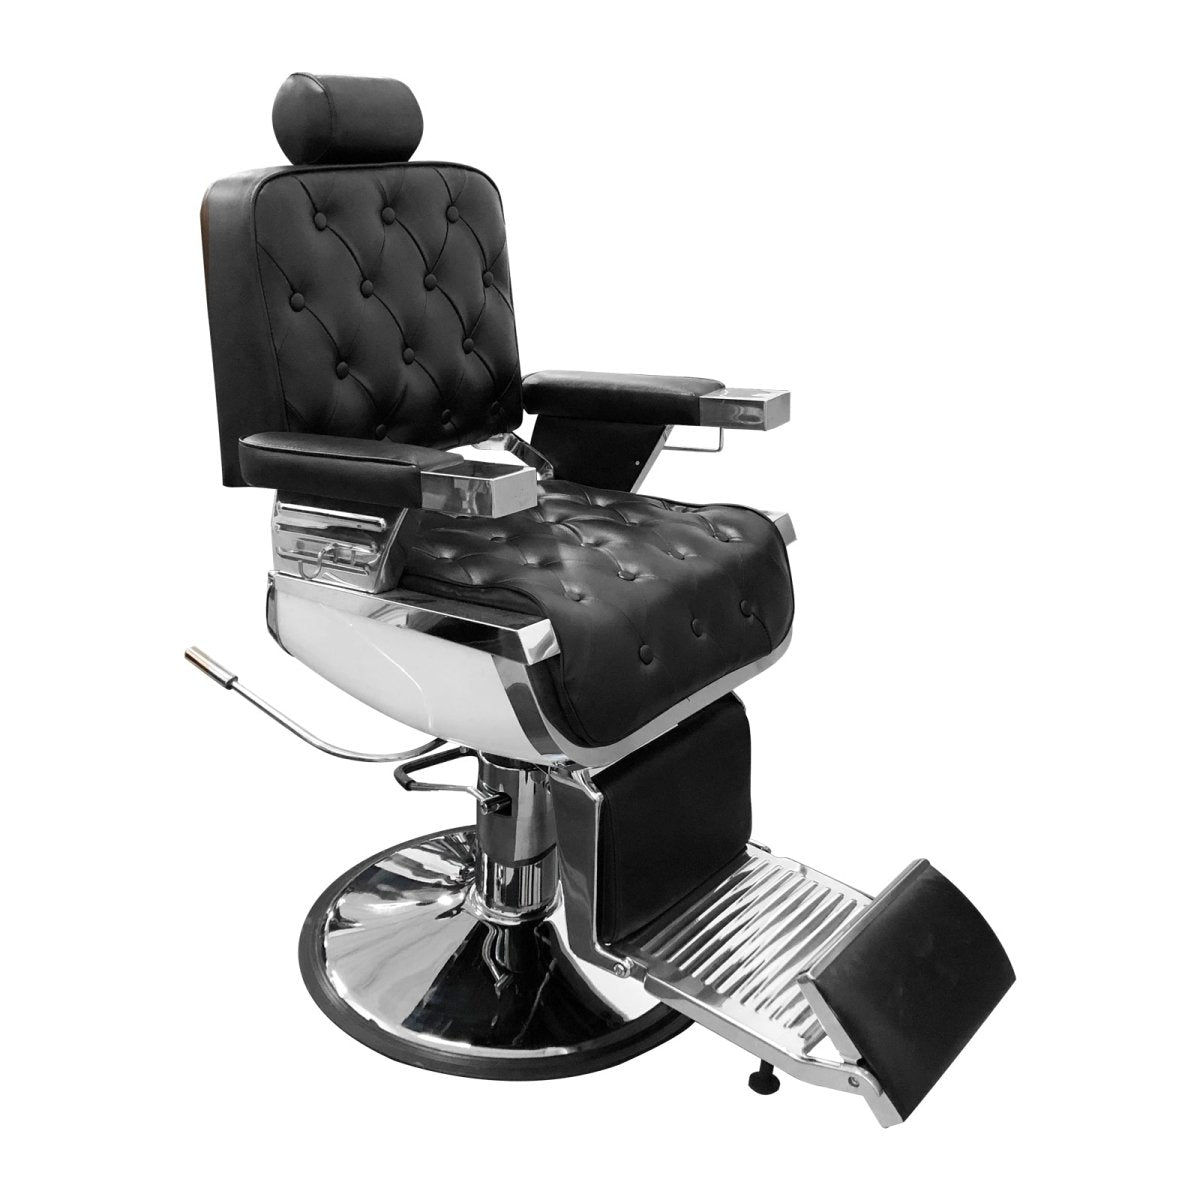 Advance Classical Reclining Salon Barber Chair - BC 901 - GreenLife-Barber chair